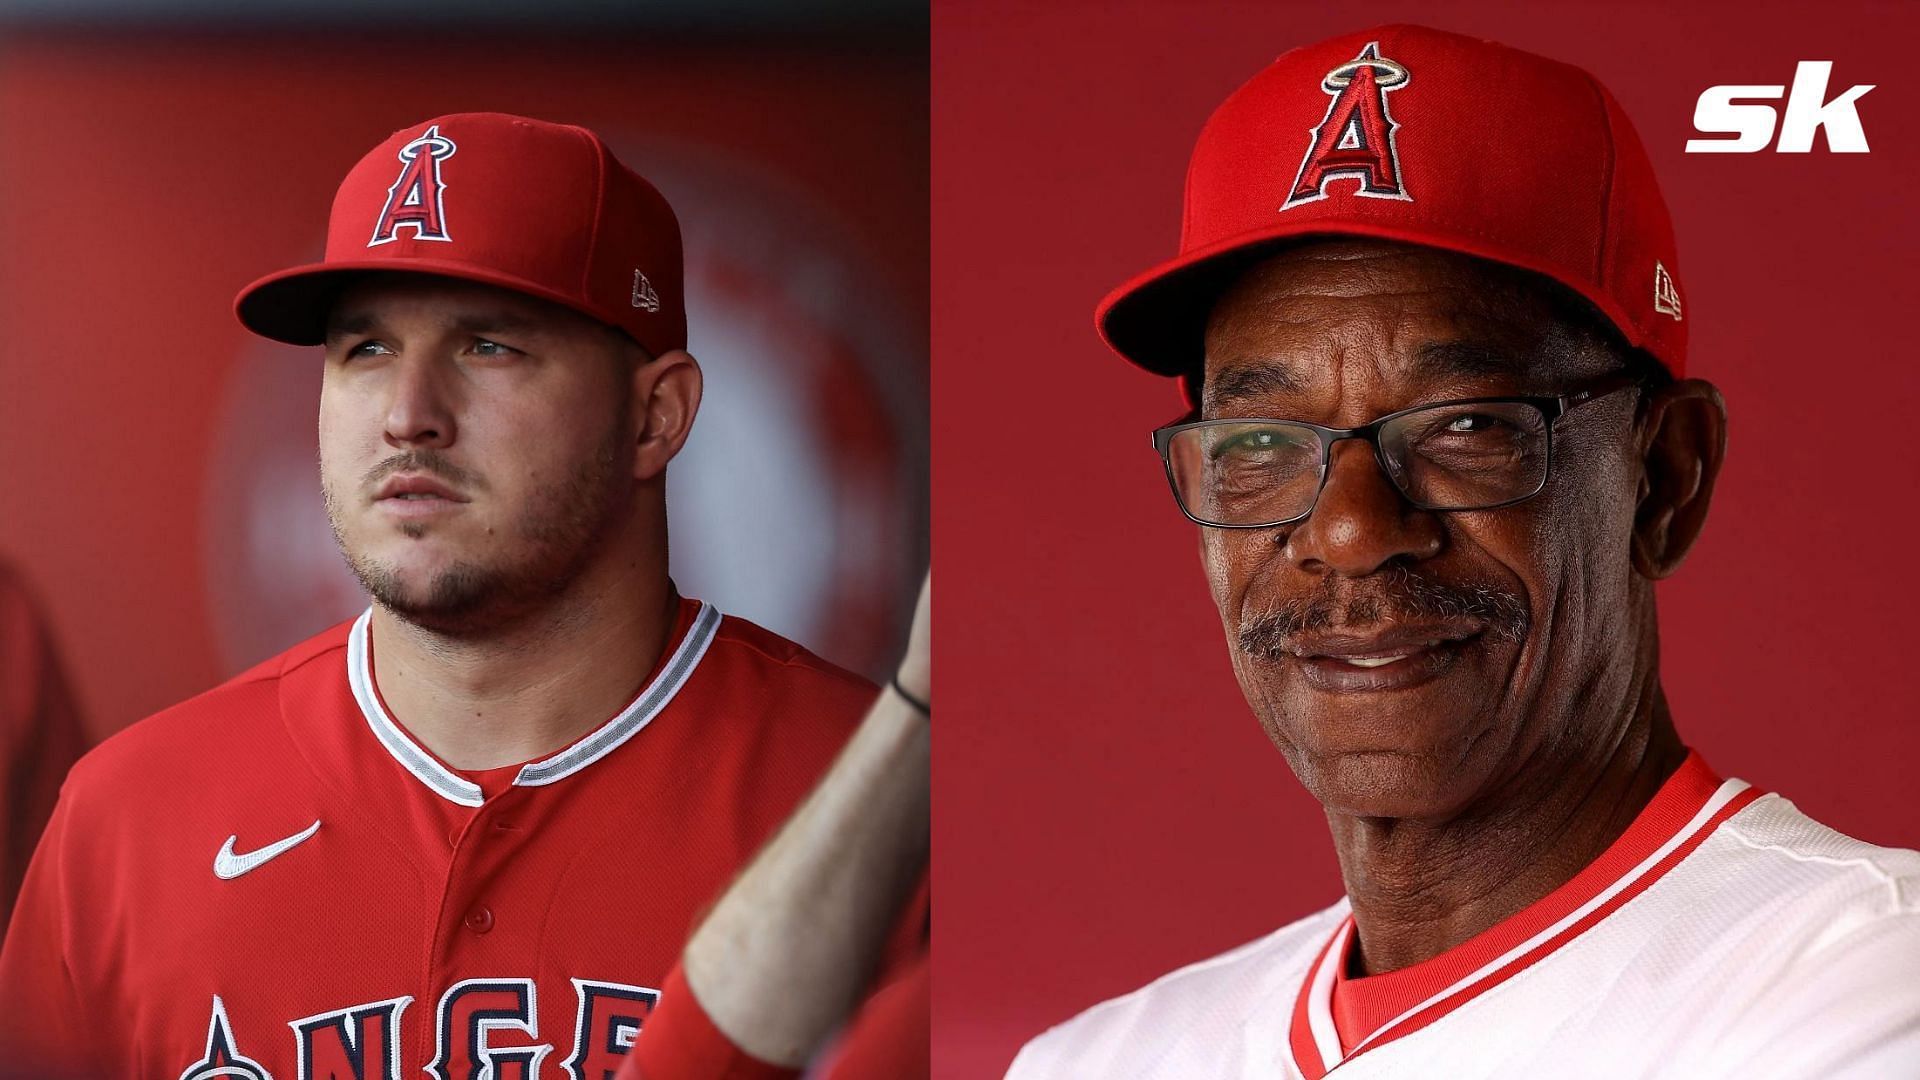 Angels Manager Ron Washington praises Mike Trout and how his leadership is rubbing off on young players